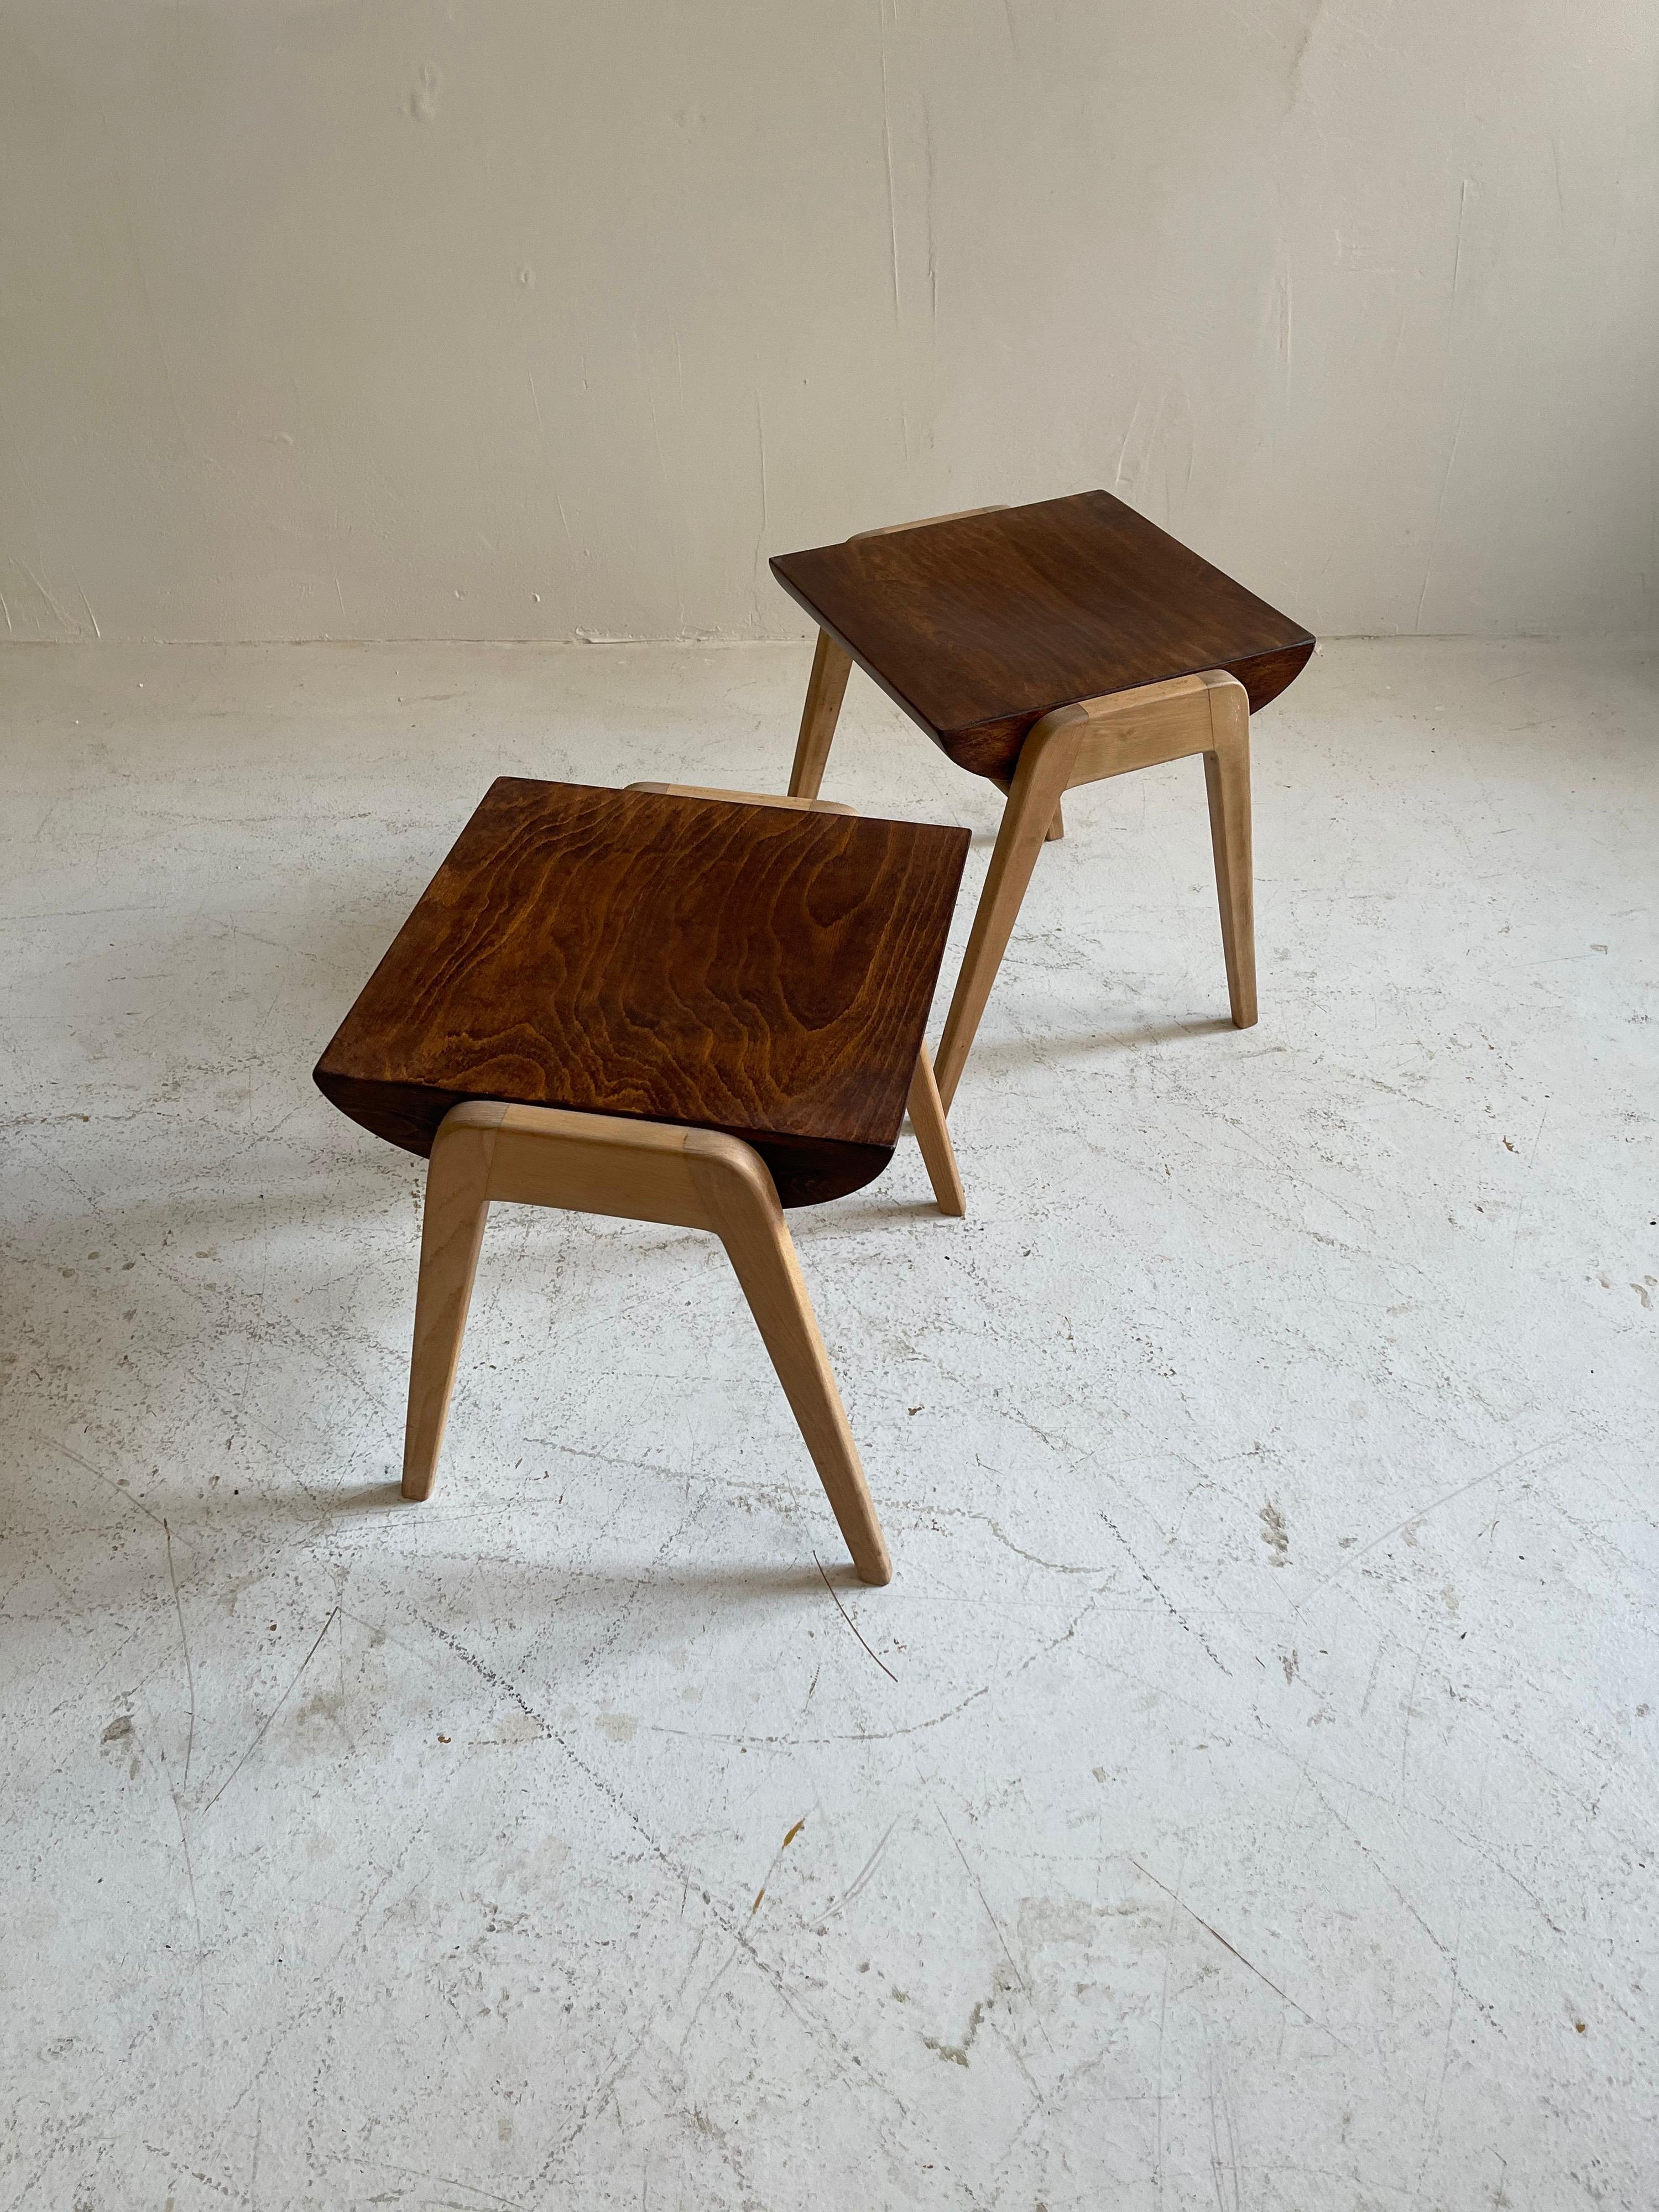 Franz Schuster Model 'Maestro' Dining Room Chairs & Stools, Austria, 1950s For Sale 7